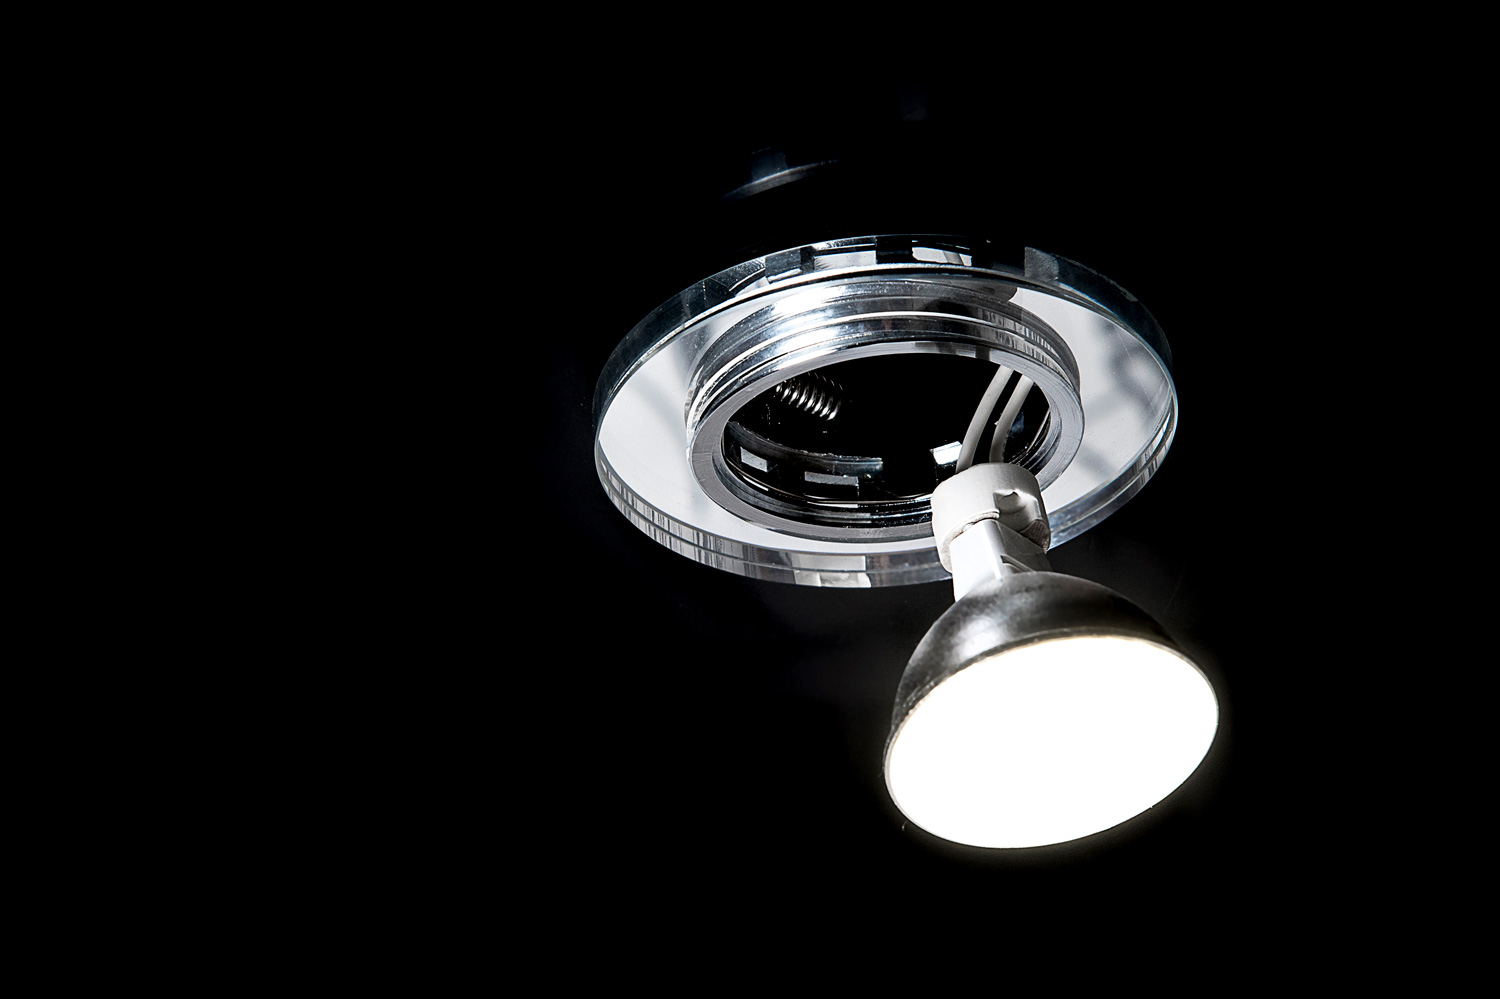 Mounting led ceiling lamp or recessed halogen lights on black suspended ceiling in room, close up.